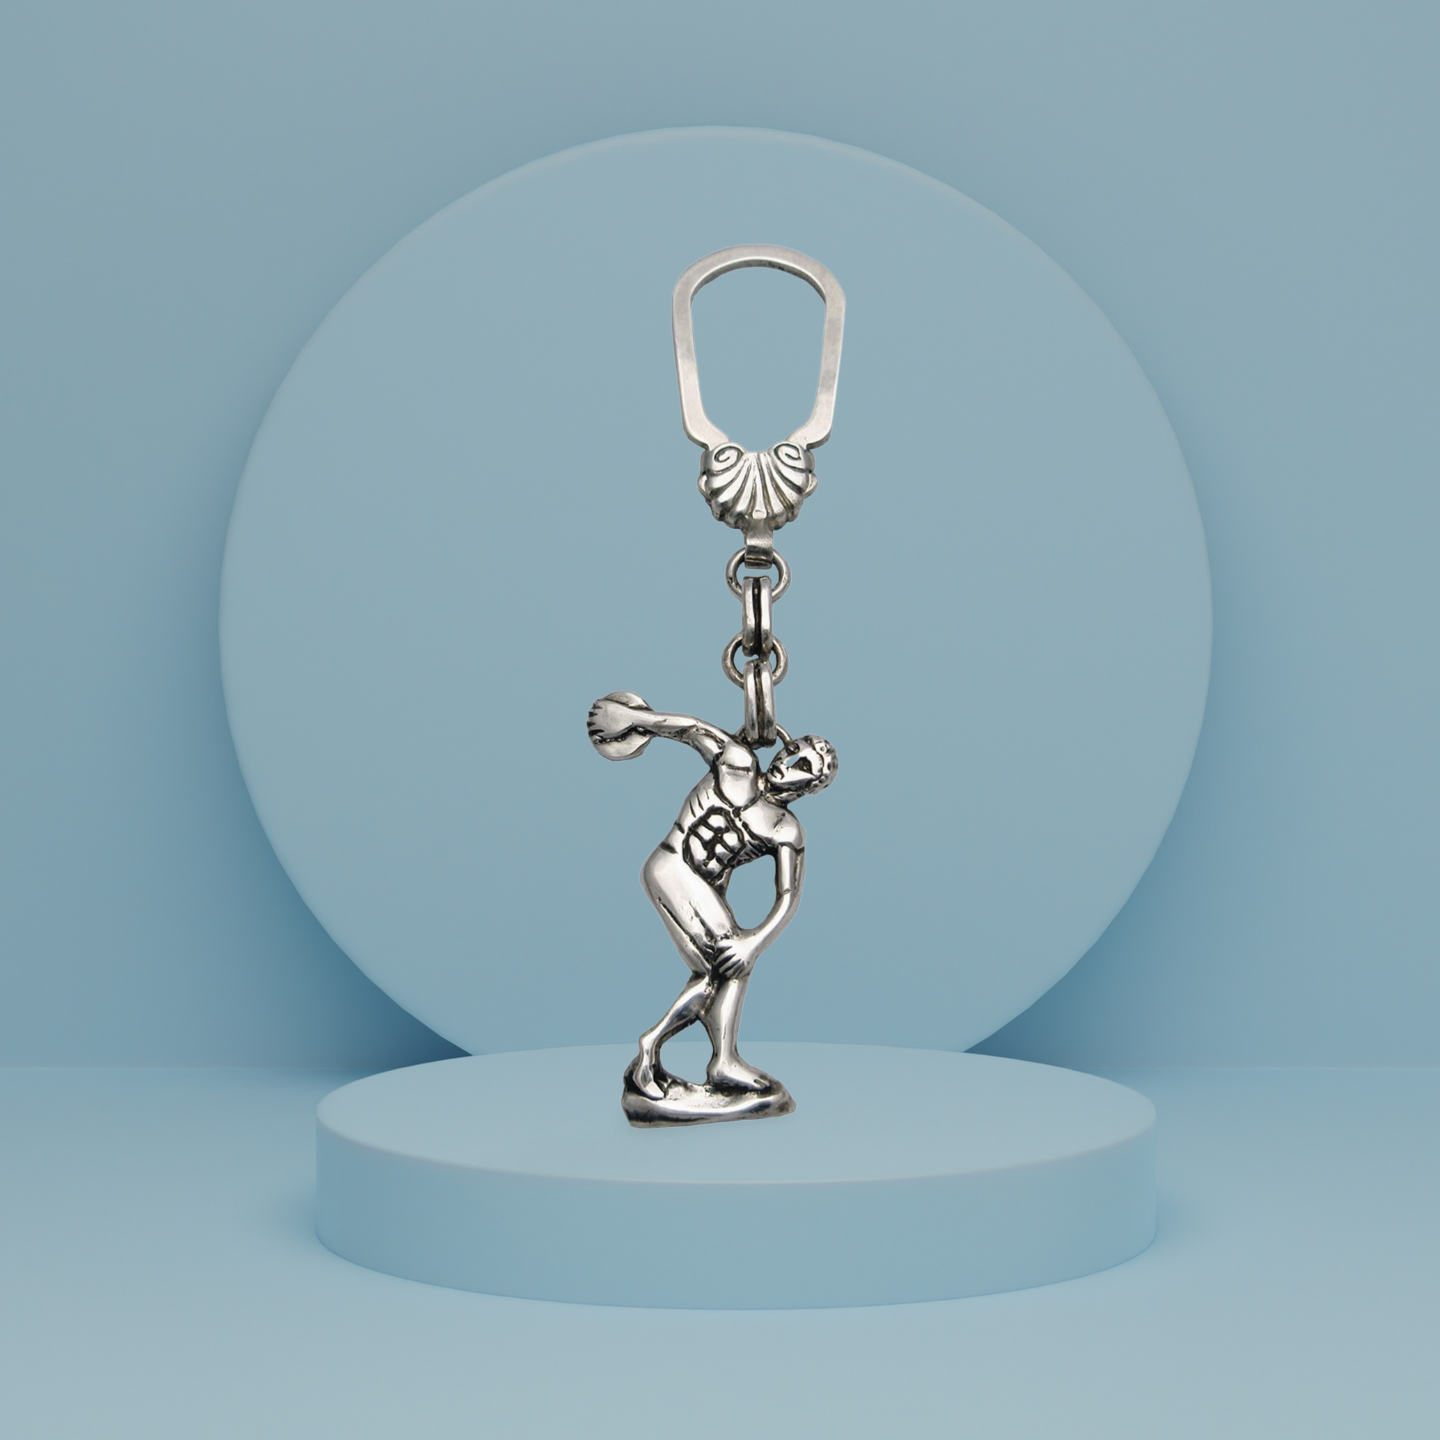 Greek Olympic Disk Thrower Key ring in sterling silver, silver keychain, men's gift, handmade keychain (MP-15)